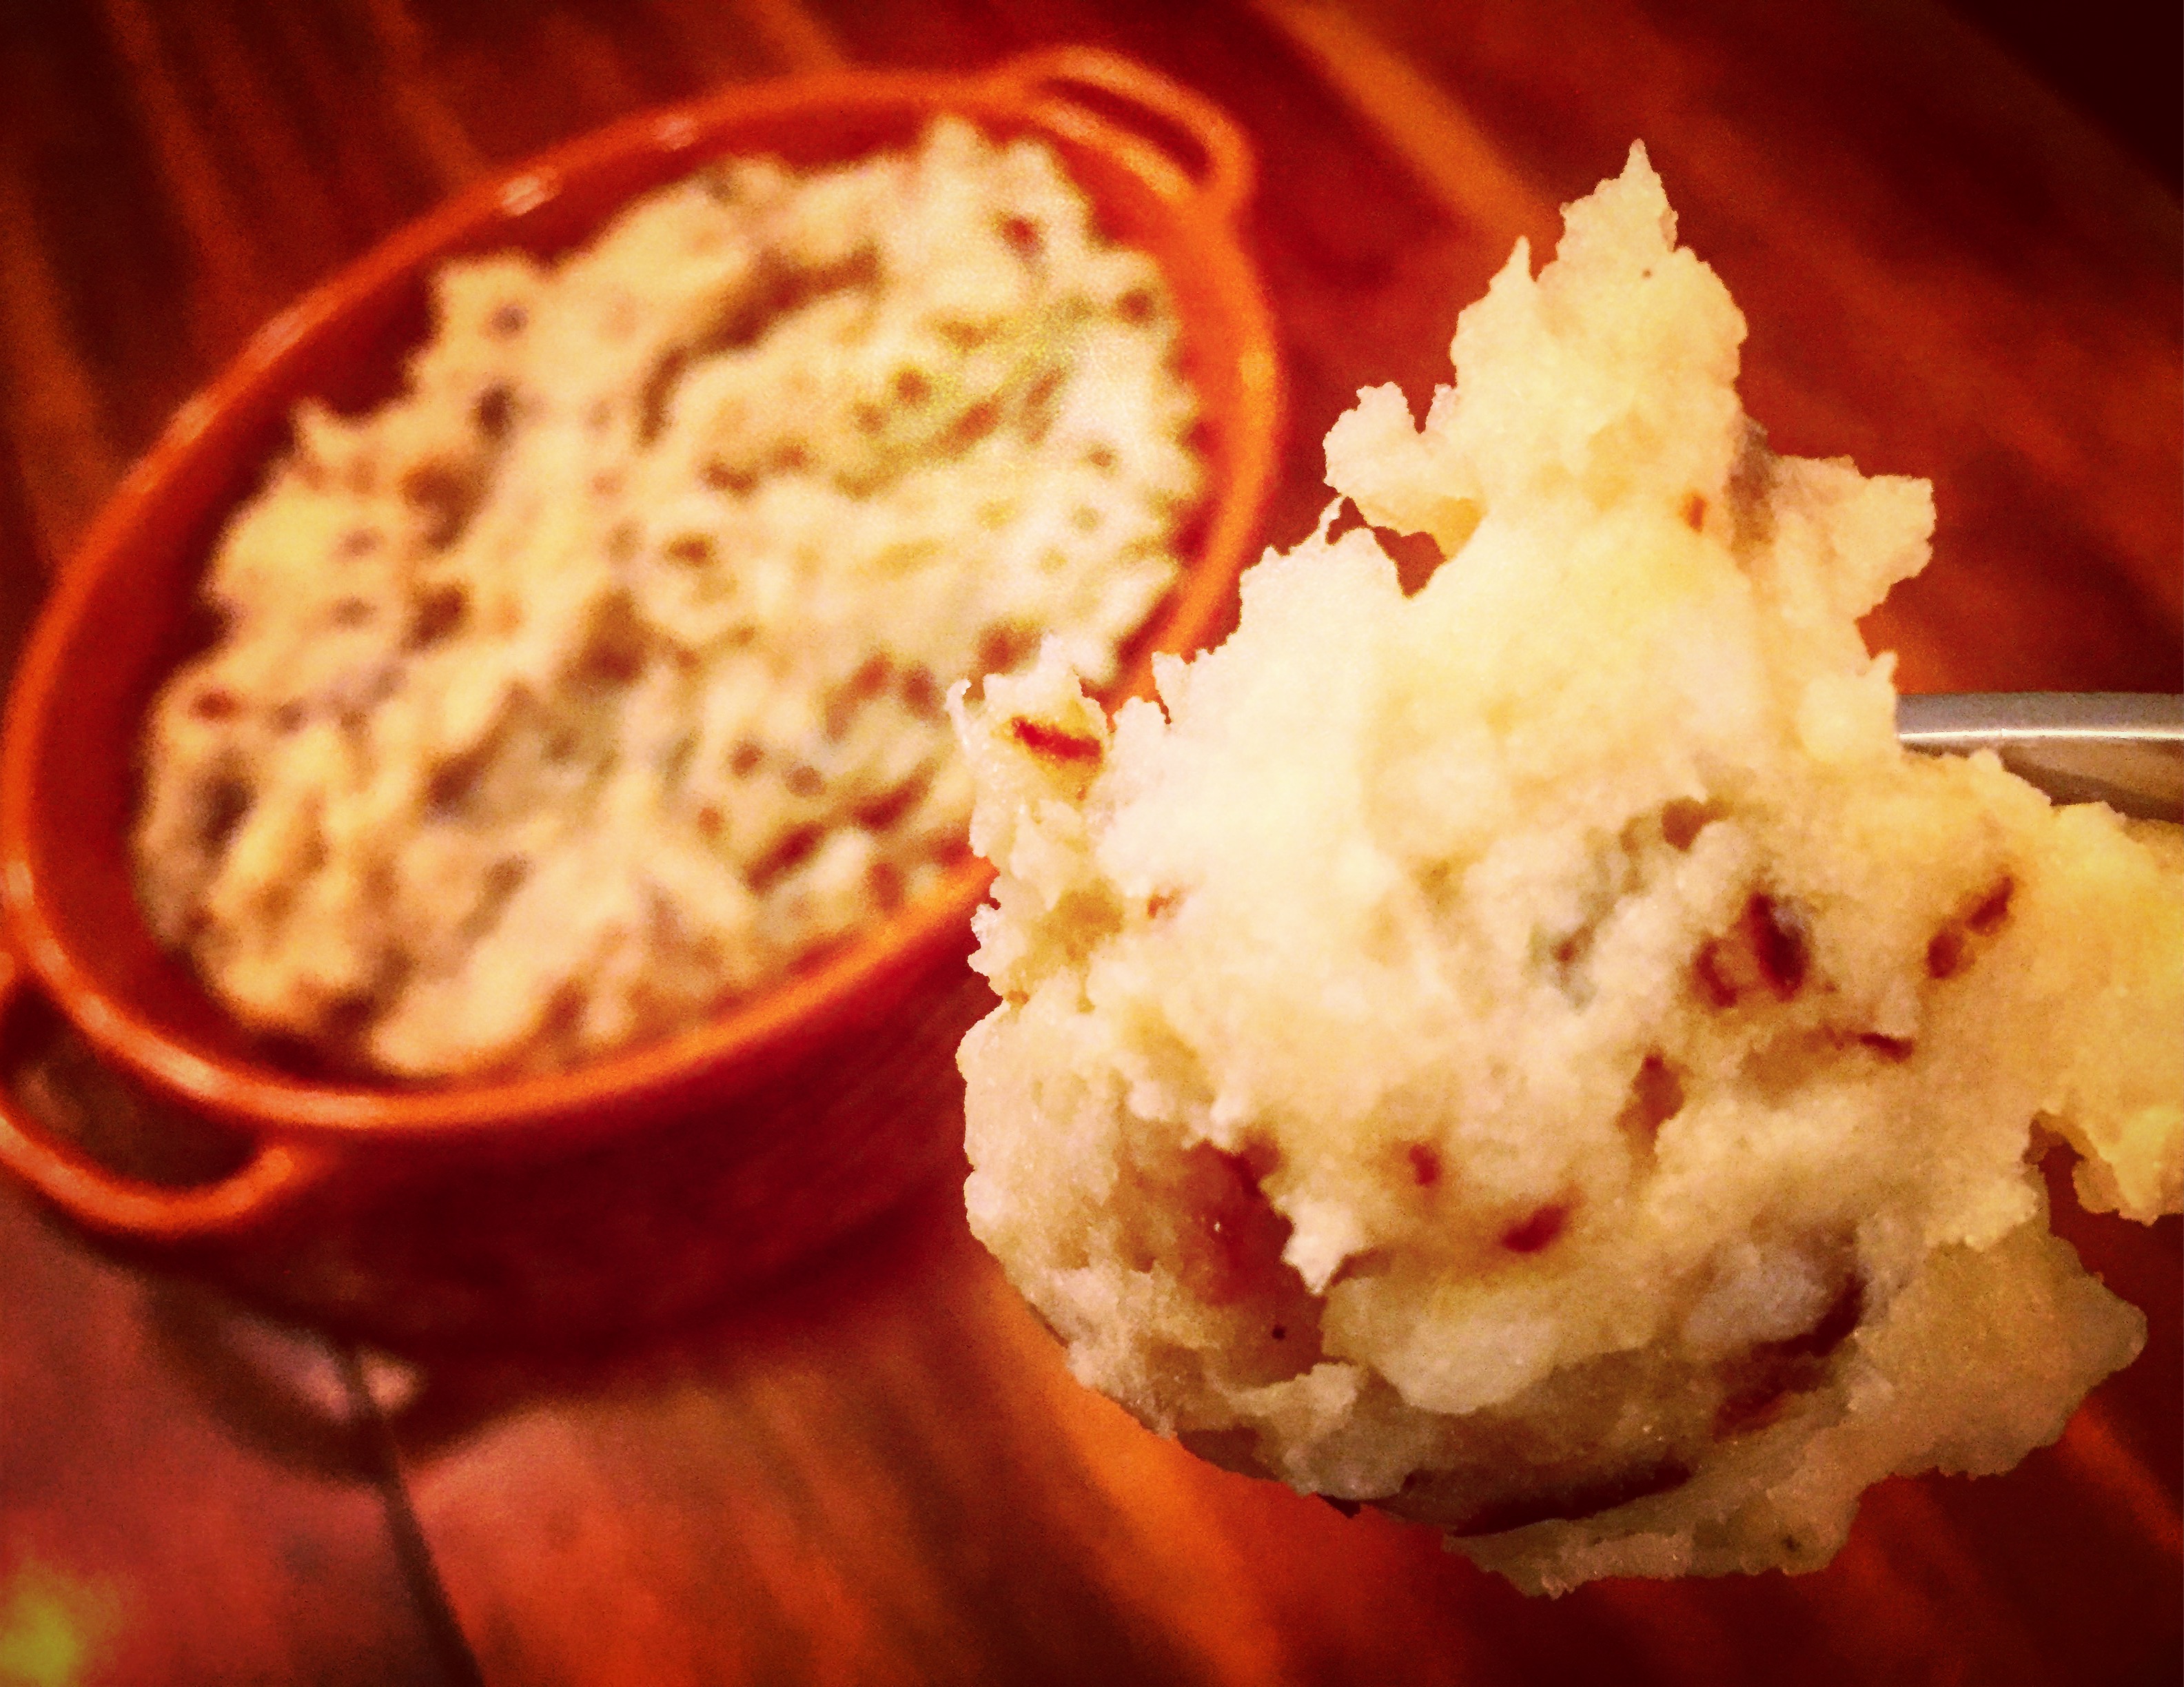 Dairy free mashed potatoes with roasted garlic & caramelized onions